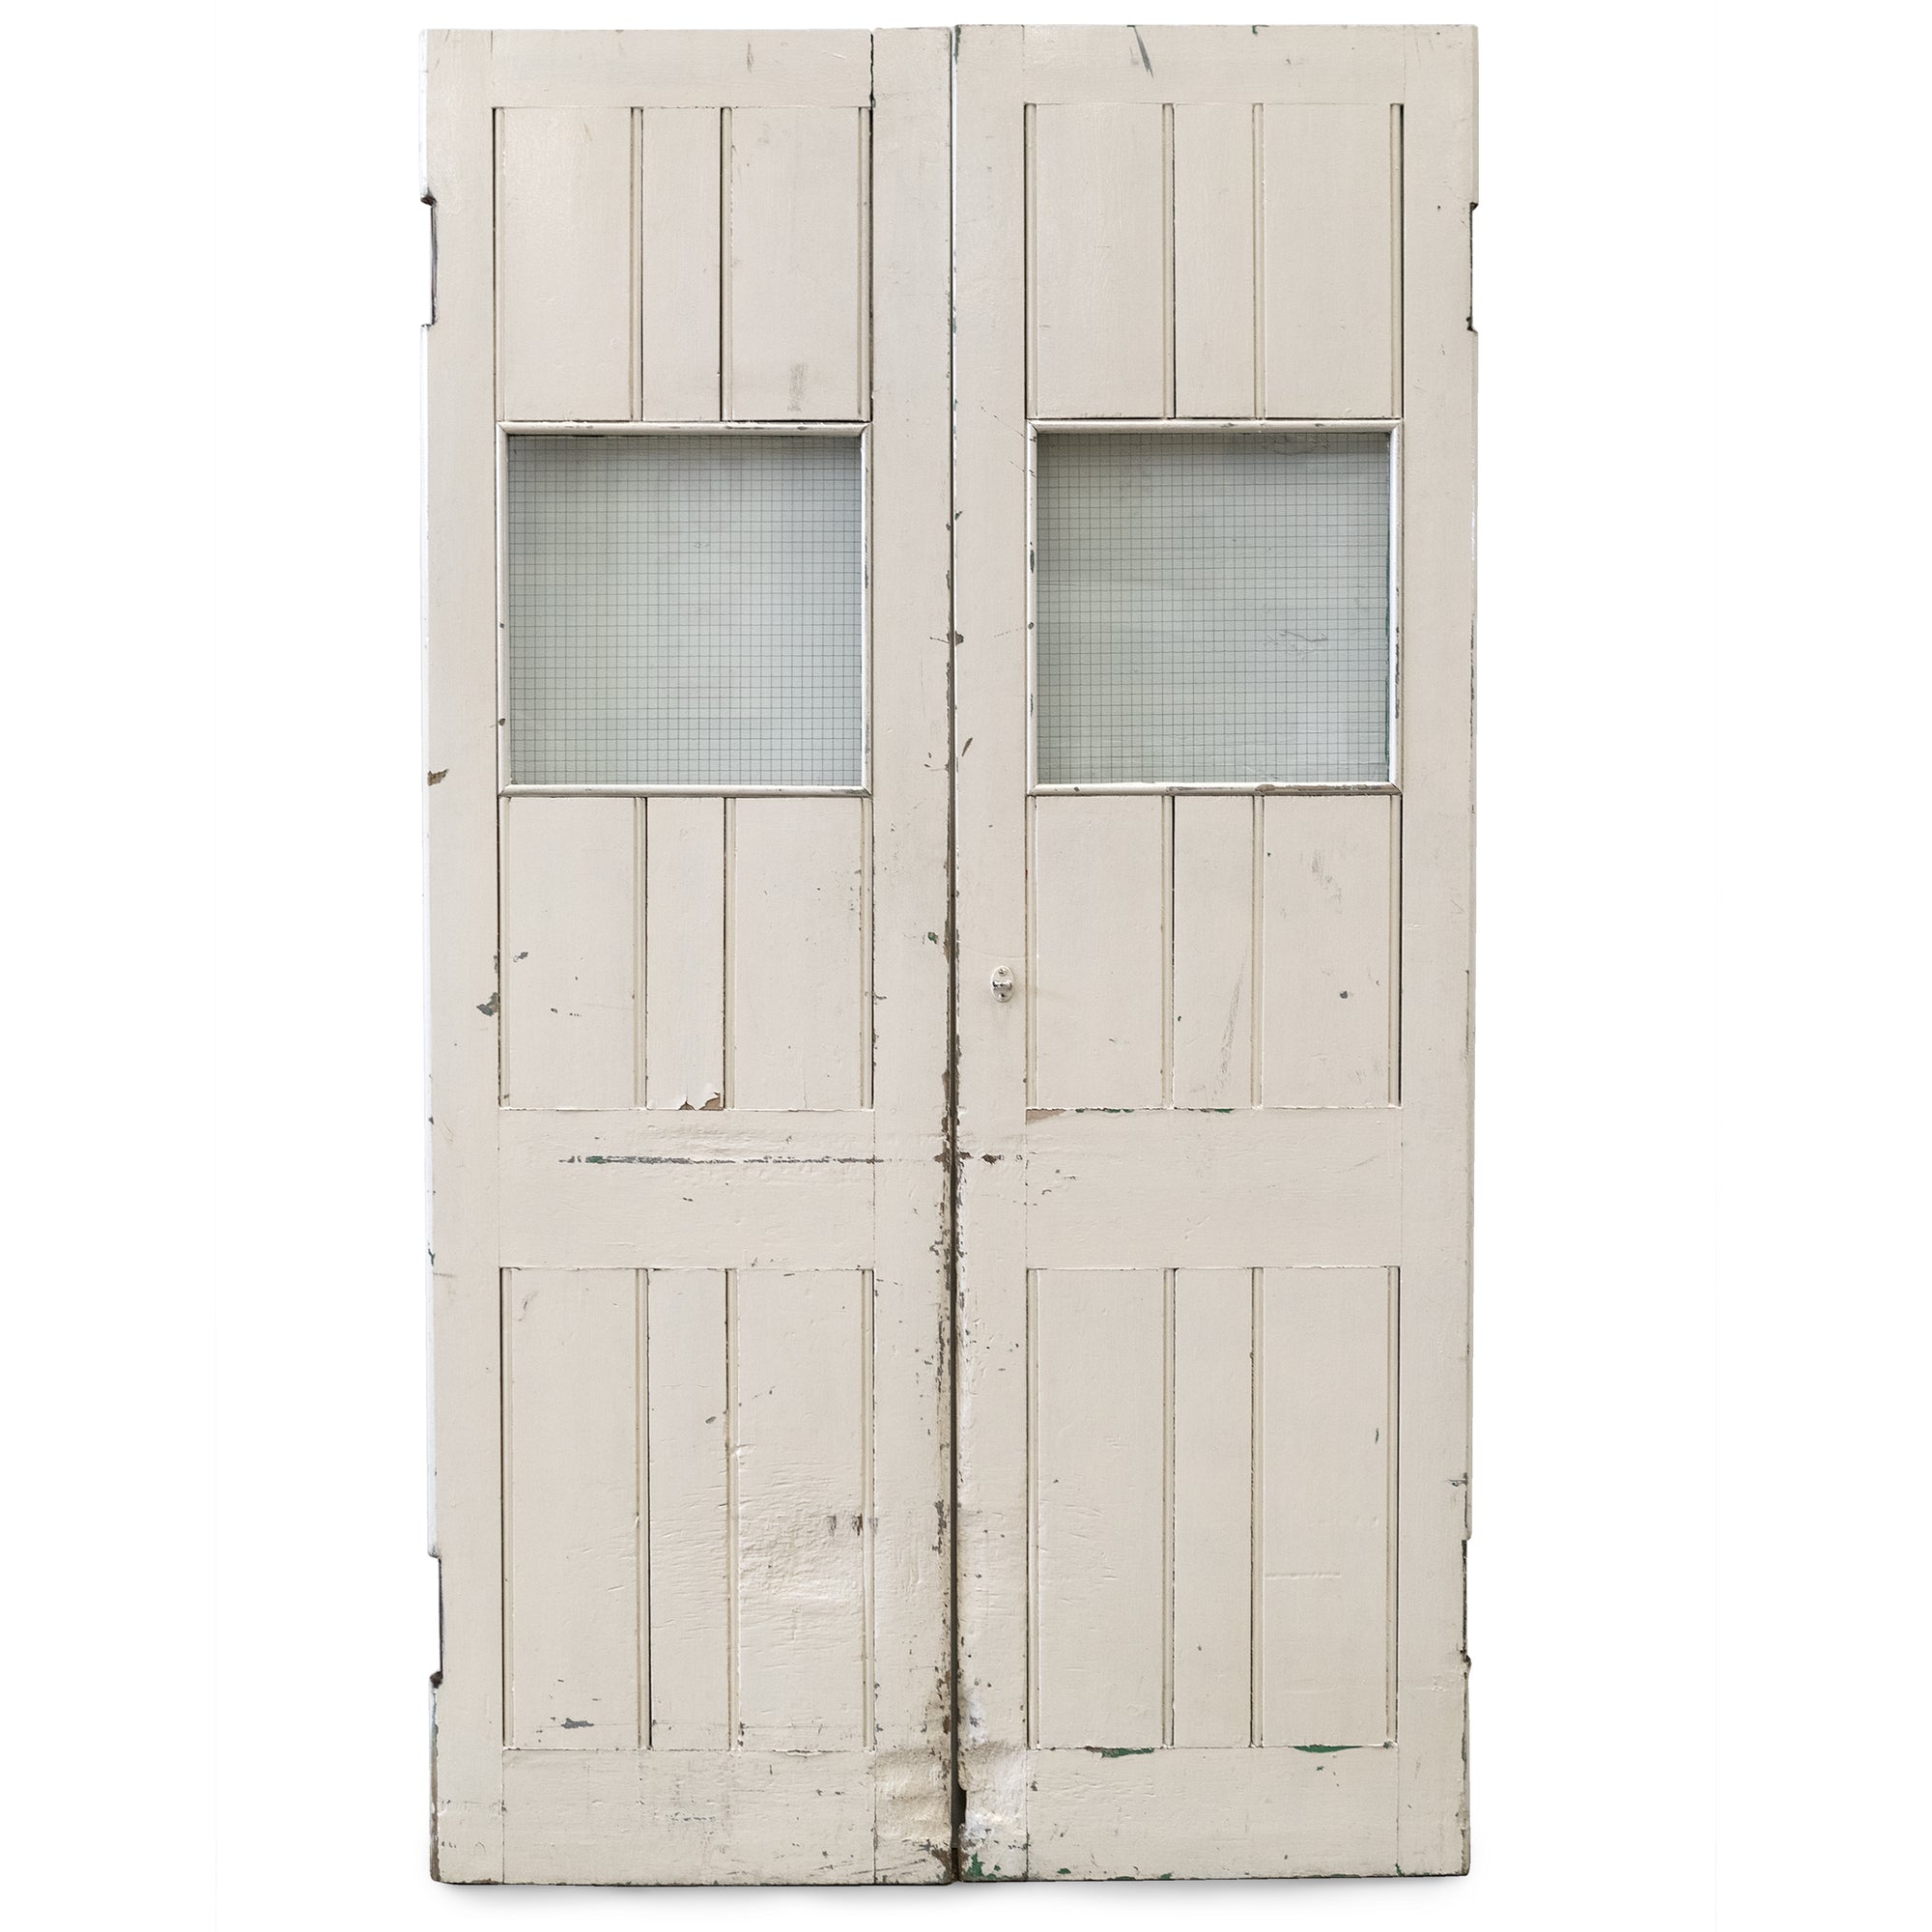 Reclaimed Glazed Emergency Exit Warehouse Doors 228cm x 128cm | The Architectural Forum